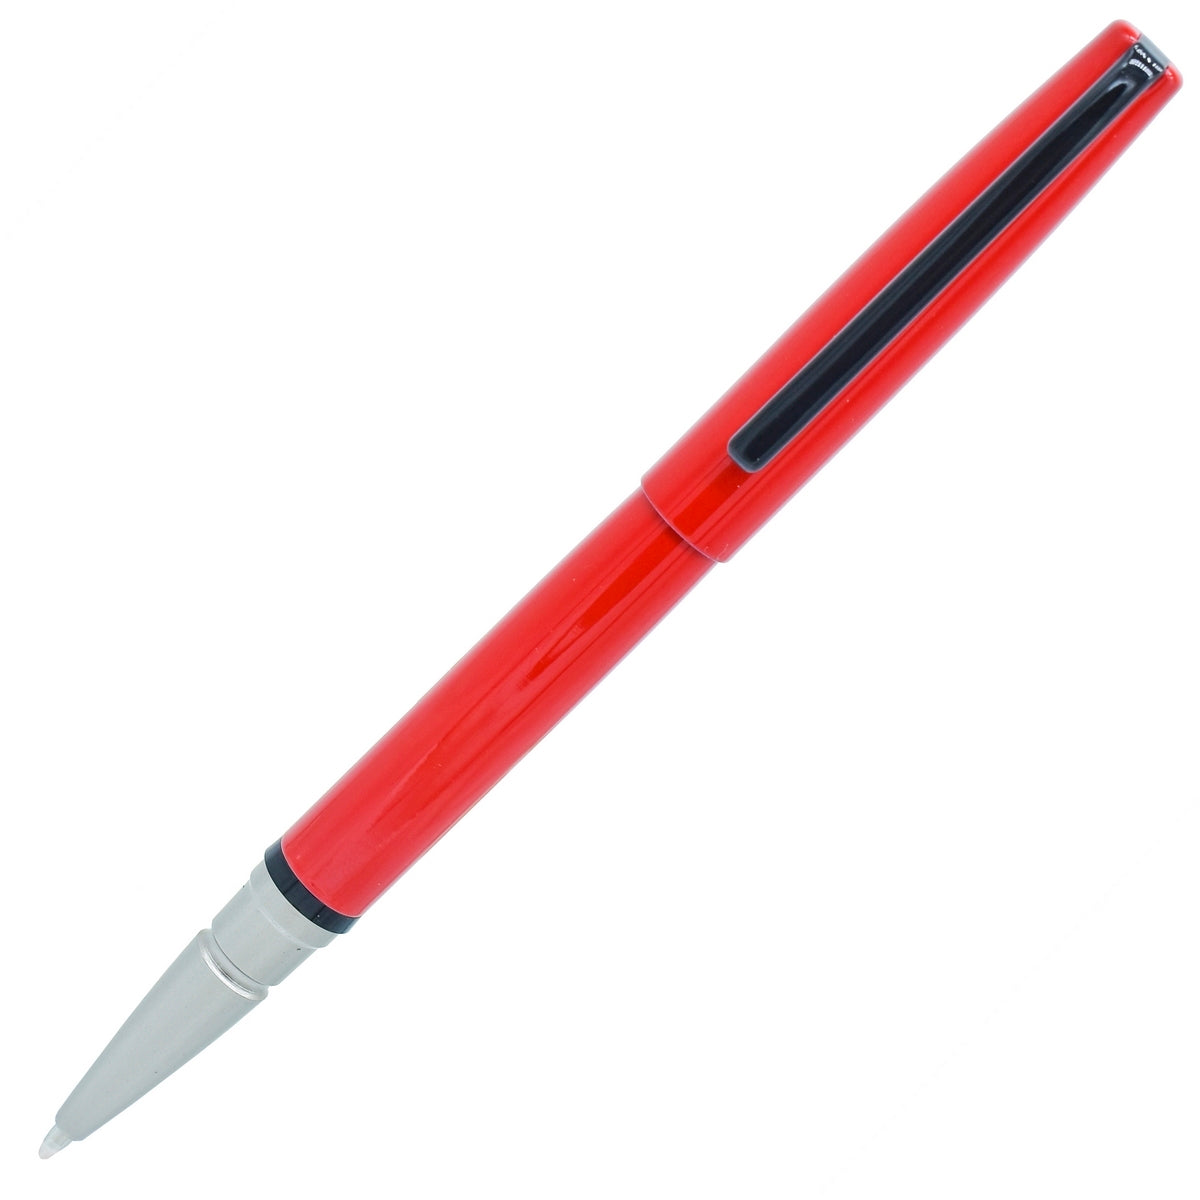 White, Black and Red Color Roller Ball Pen - For Office, College, Personal Use